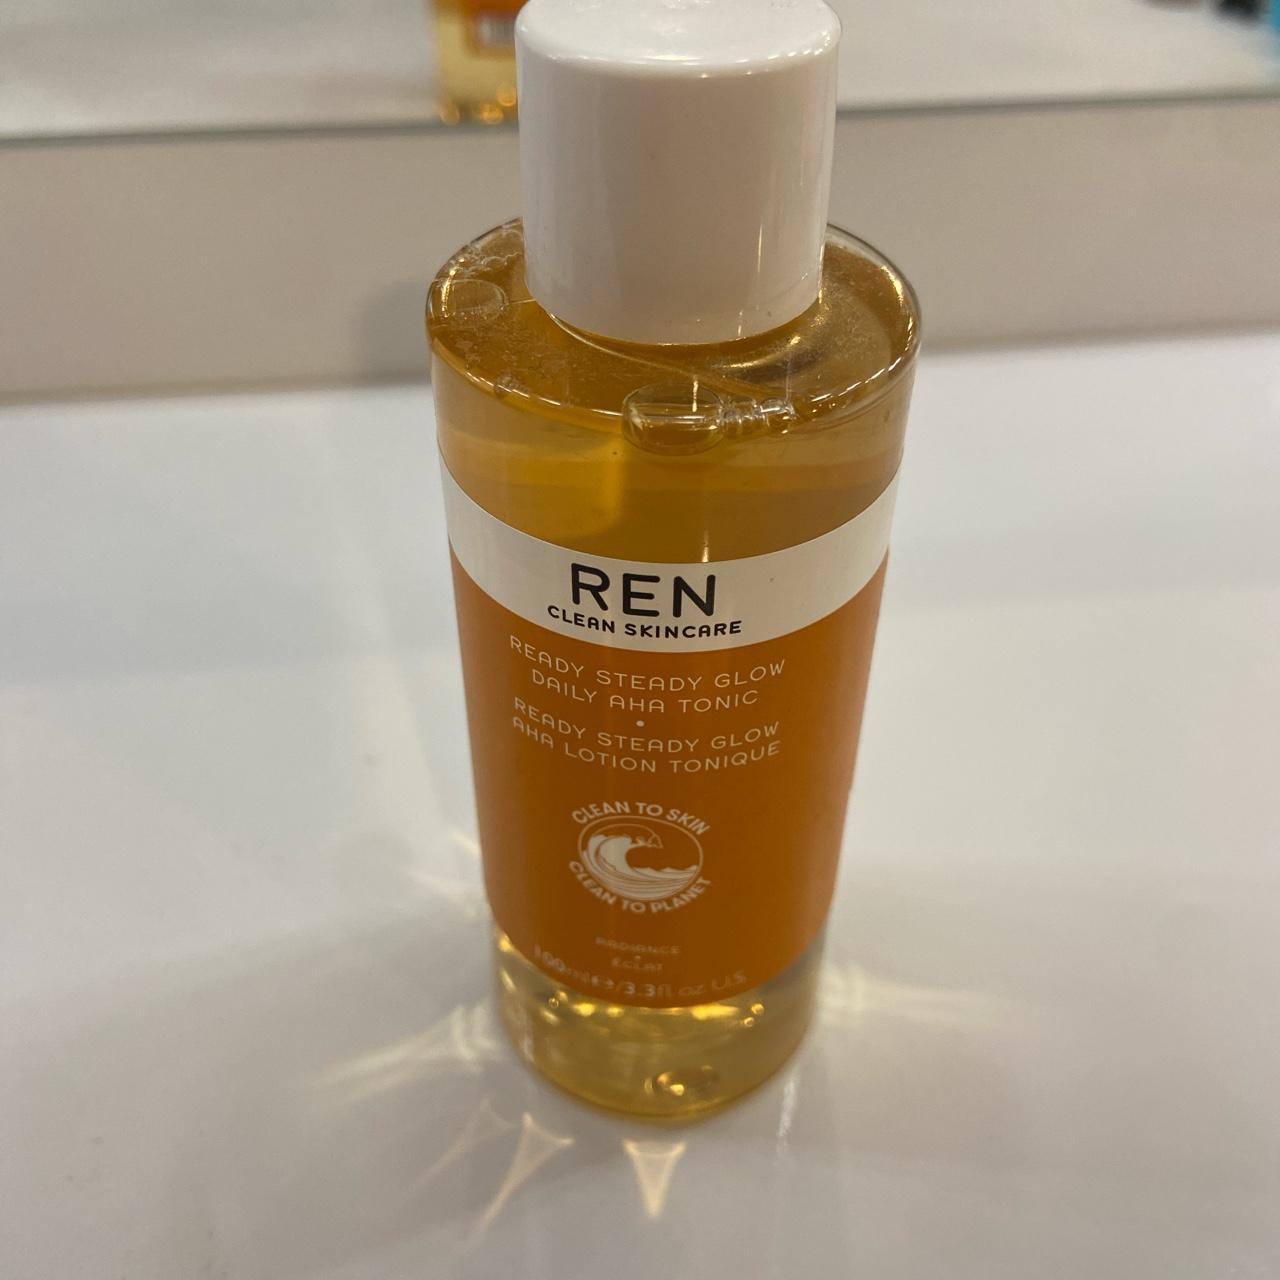 Product Image 1 - REN Clean Skincare
Ready Steady Glow